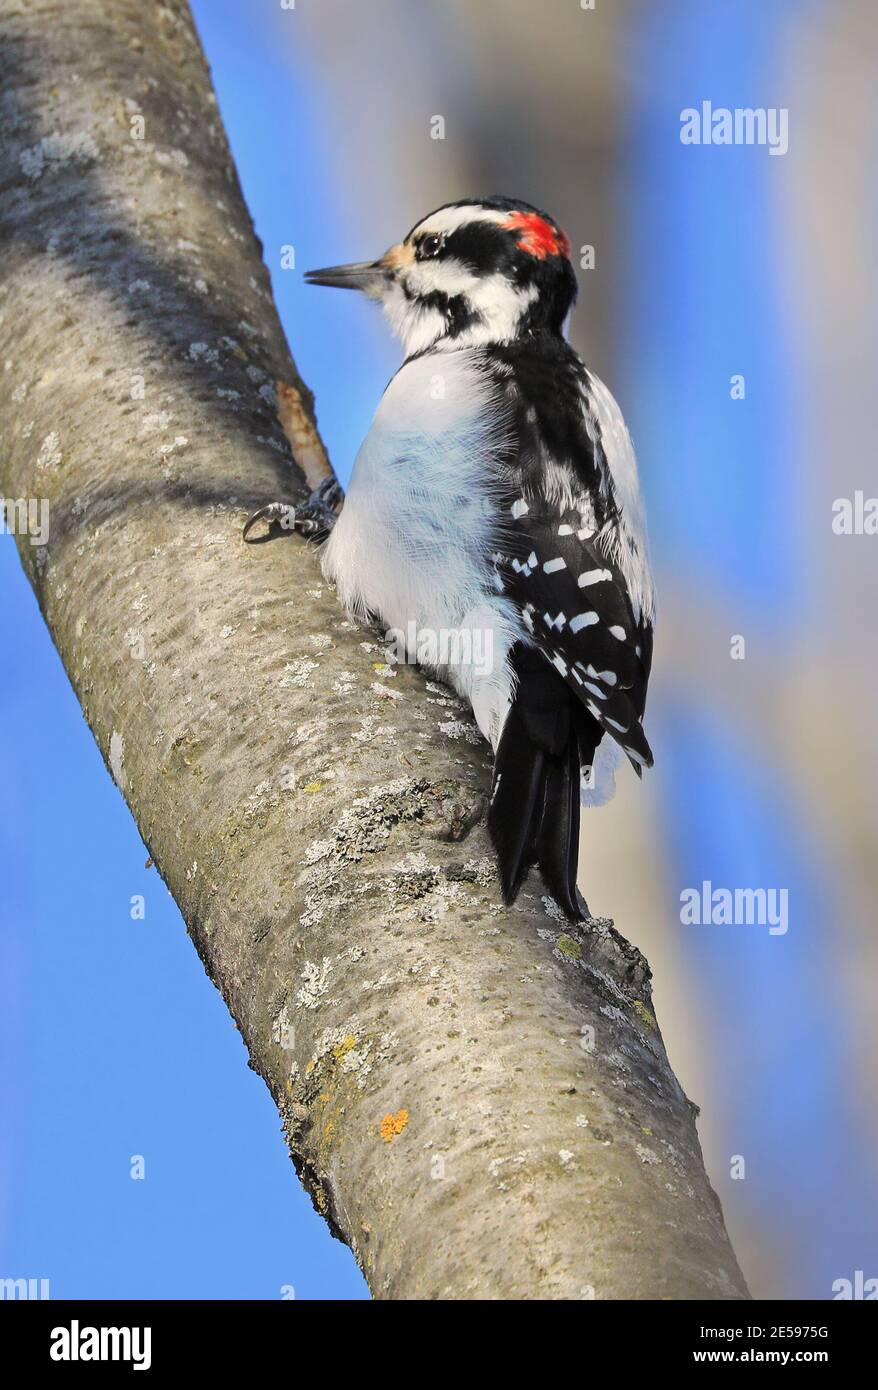 Downy woodpecker sitting on a tree branch in winter, Quebec, Canada Stock Photo